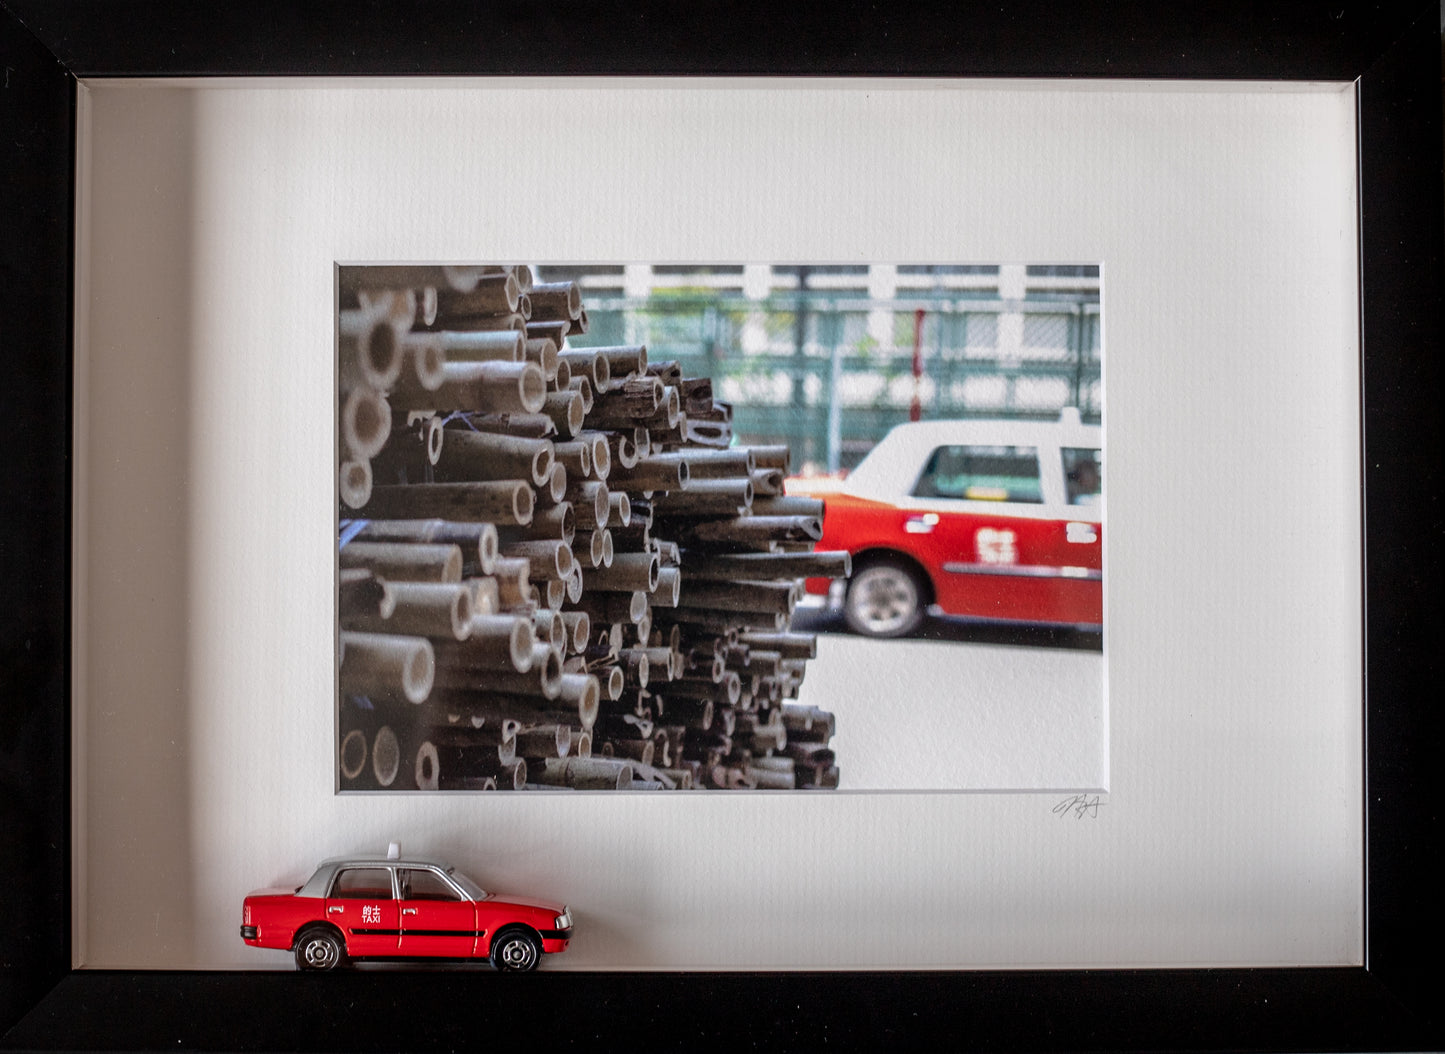 Bamboo Taxi Framed picture with Miniture Red Hong Kong Taxi